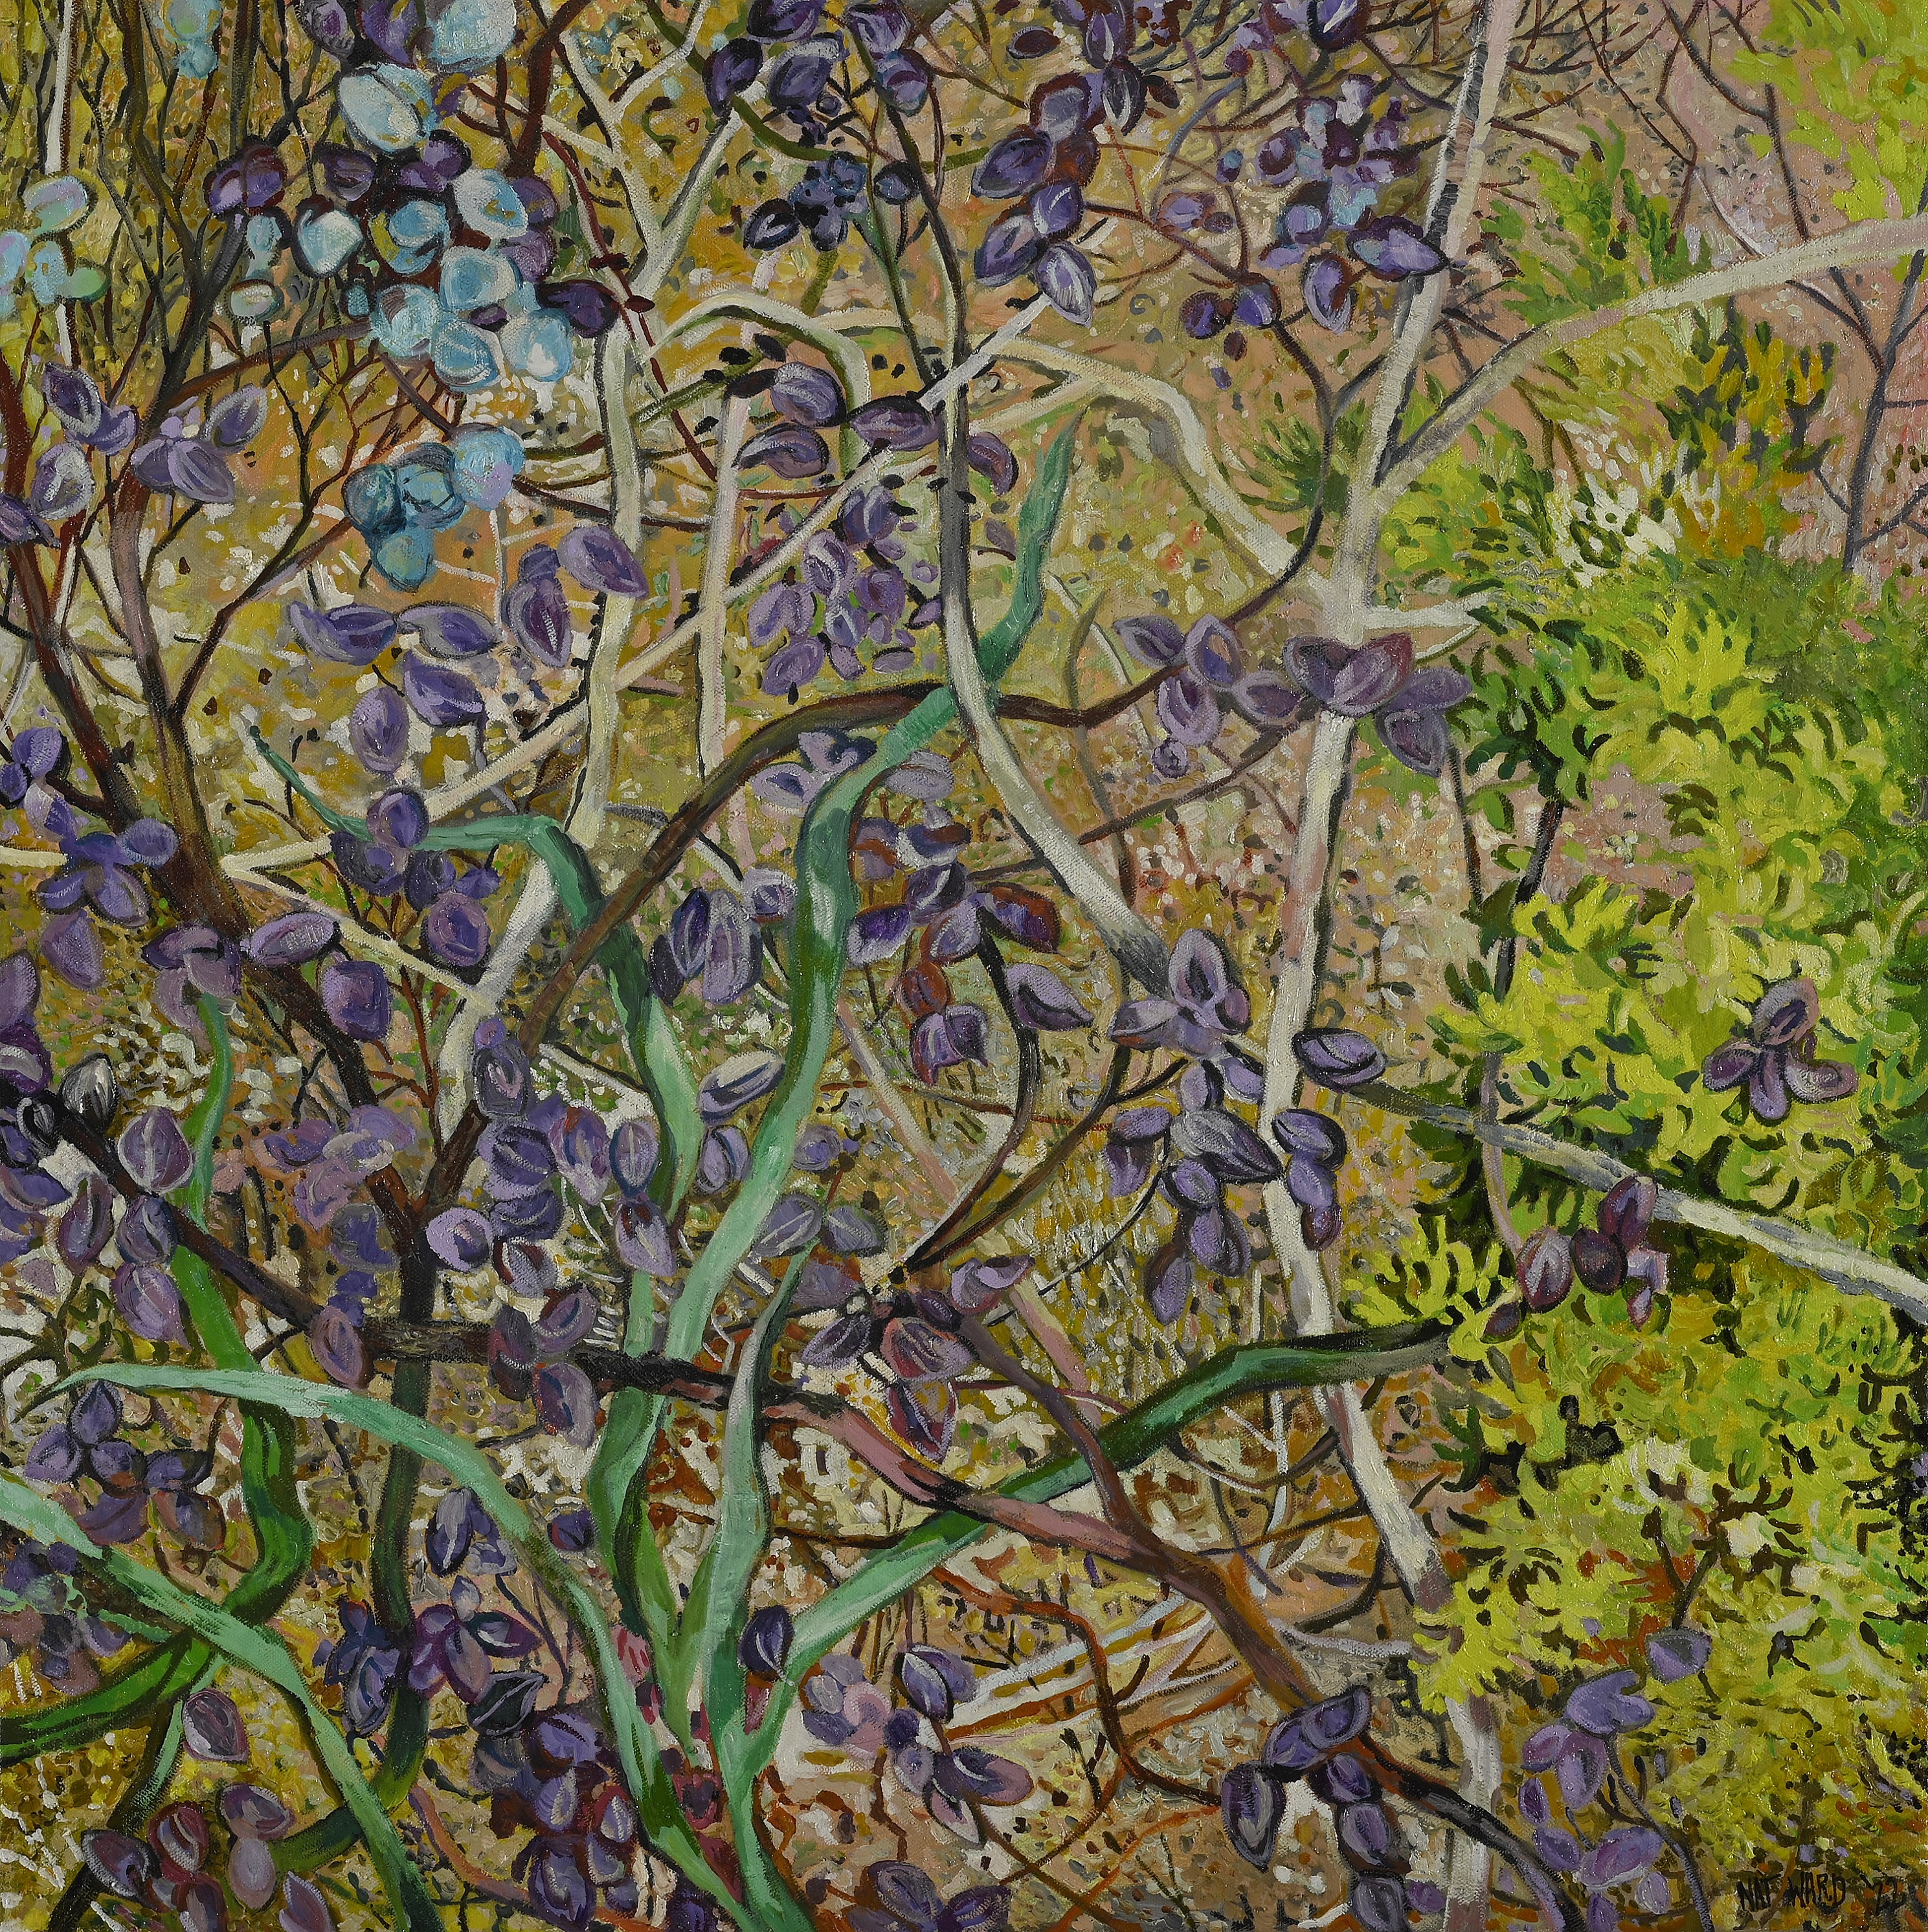 Chocolate lily buds in bushland by Nat Ward | Lethbridge 20000 2022 Finalists | Lethbridge Gallery